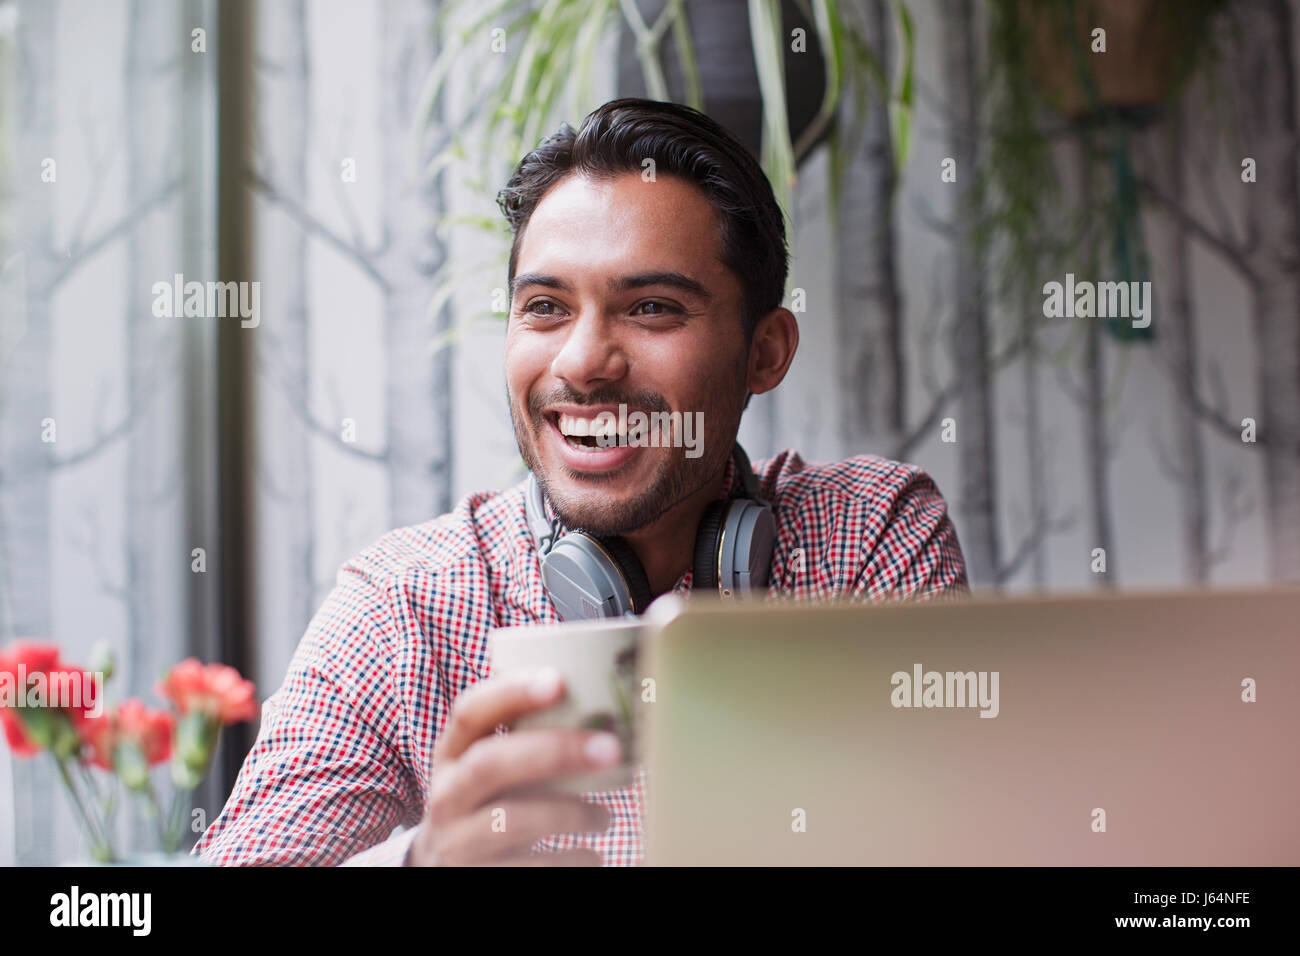 Man laughing and drinking coffee at laptop in cafe Stock Photo